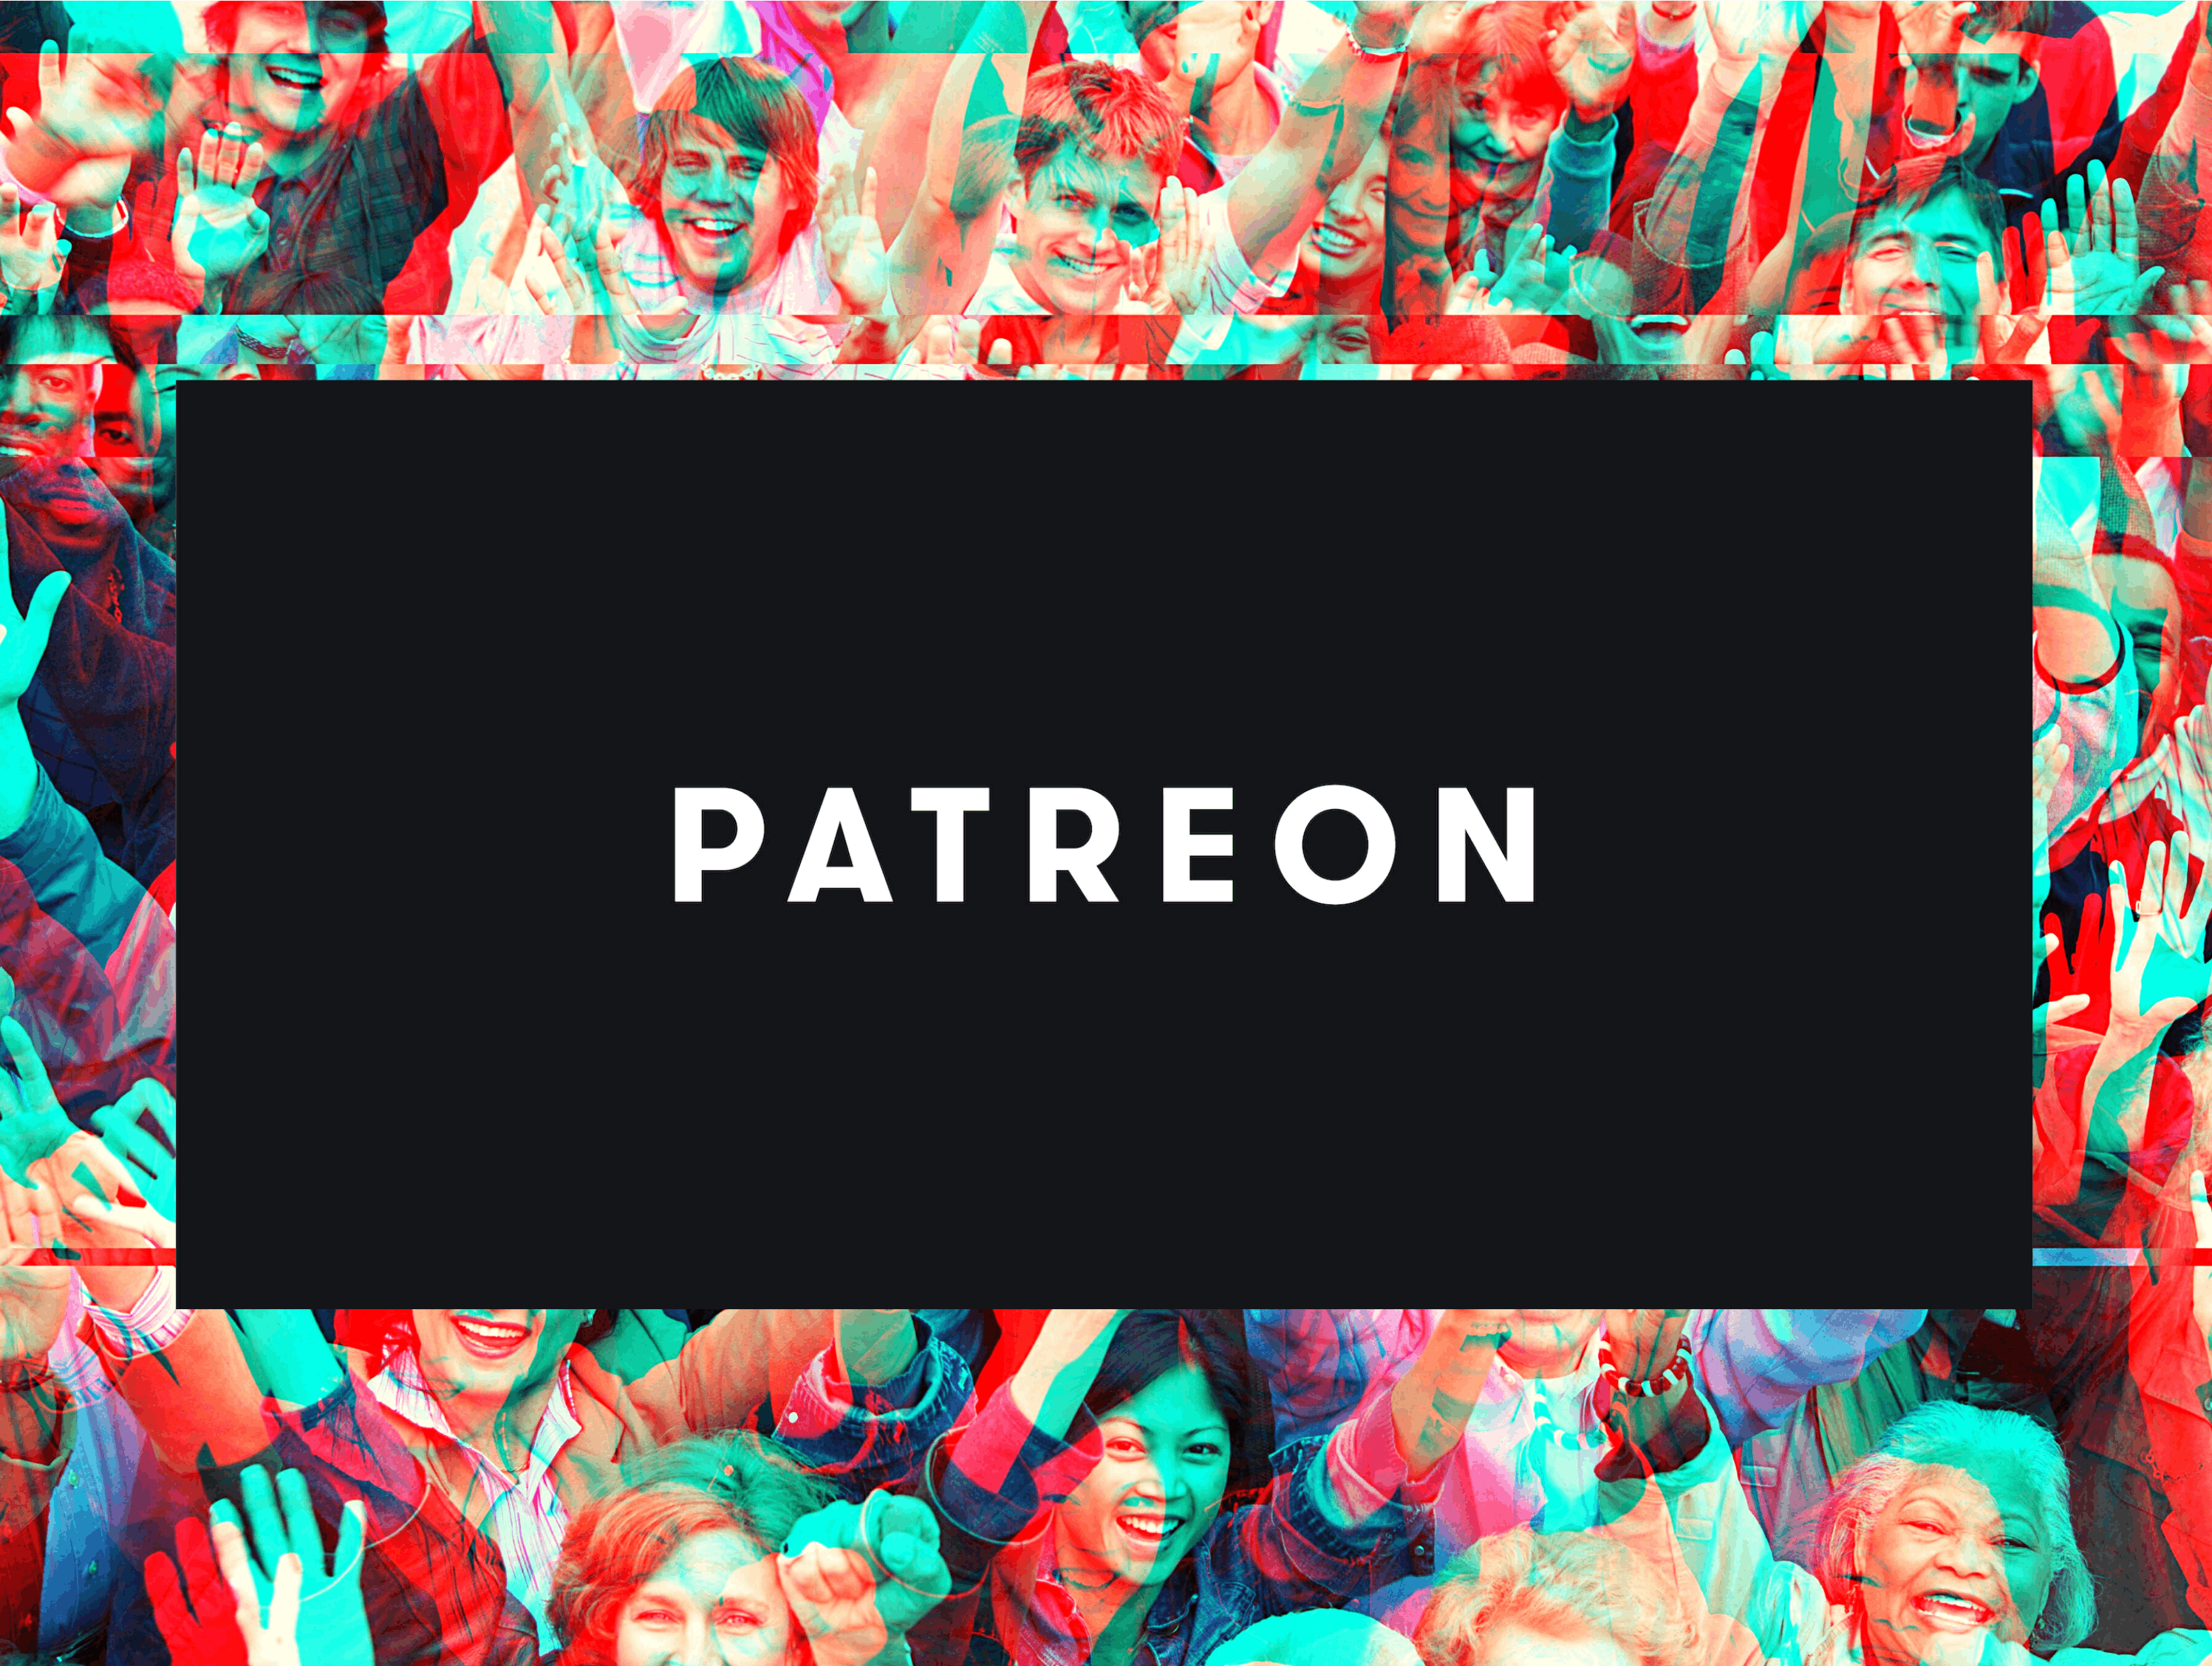 Made with Canva and Patreon brand assets